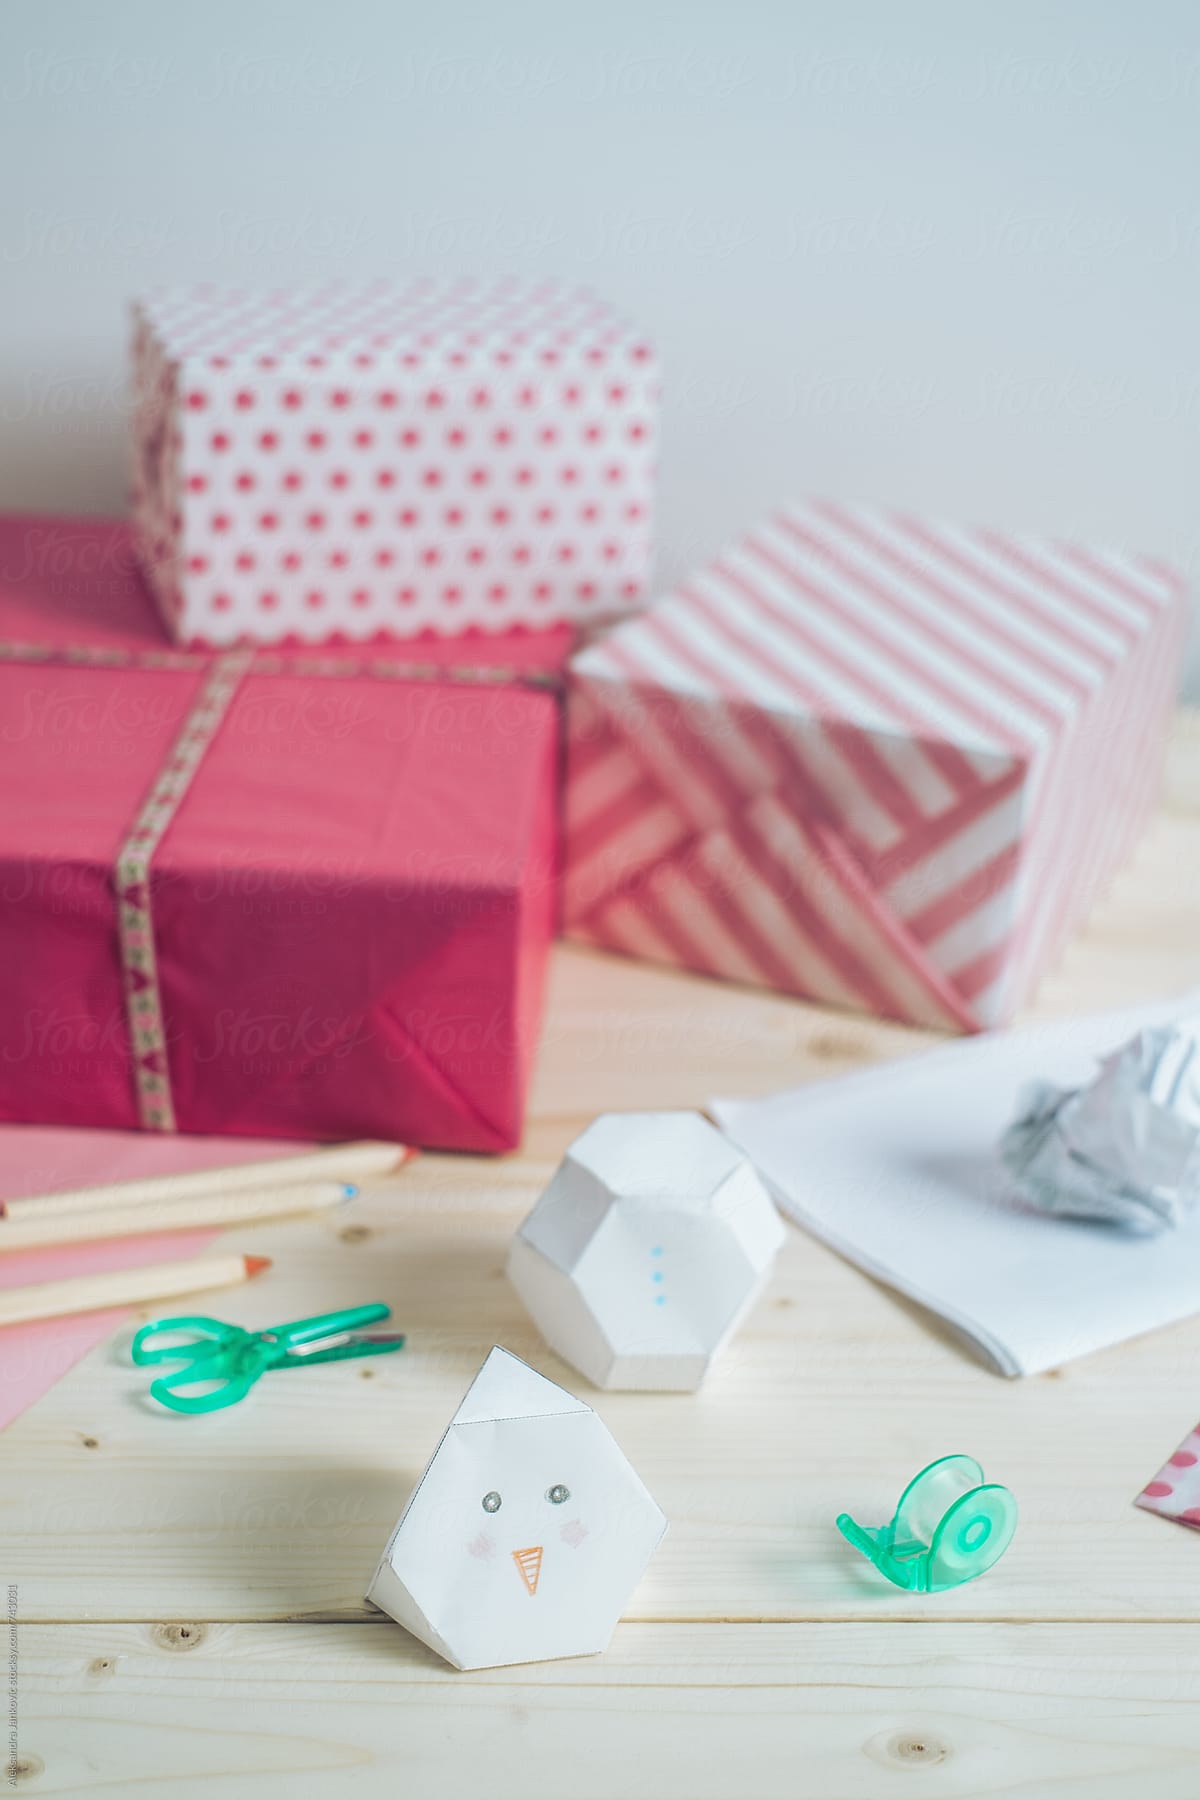 DIY Paper Snowman On The Desk With Pink Presents